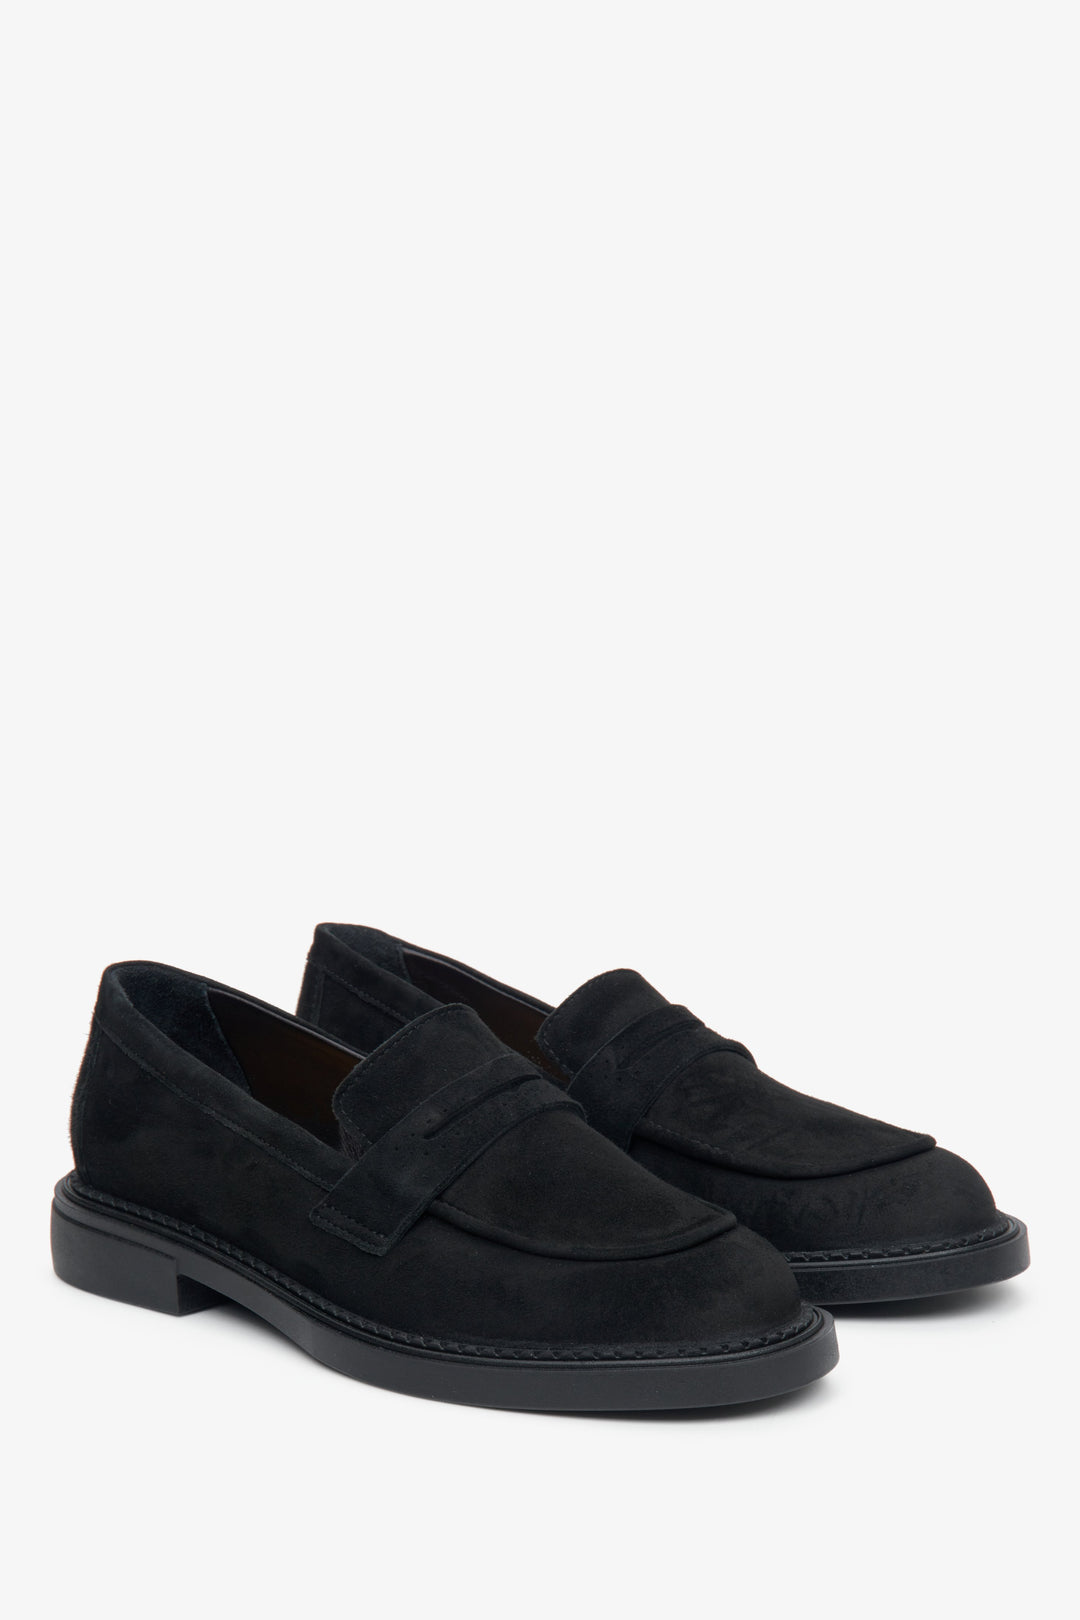 Women's black suede loafers for fall Estro.